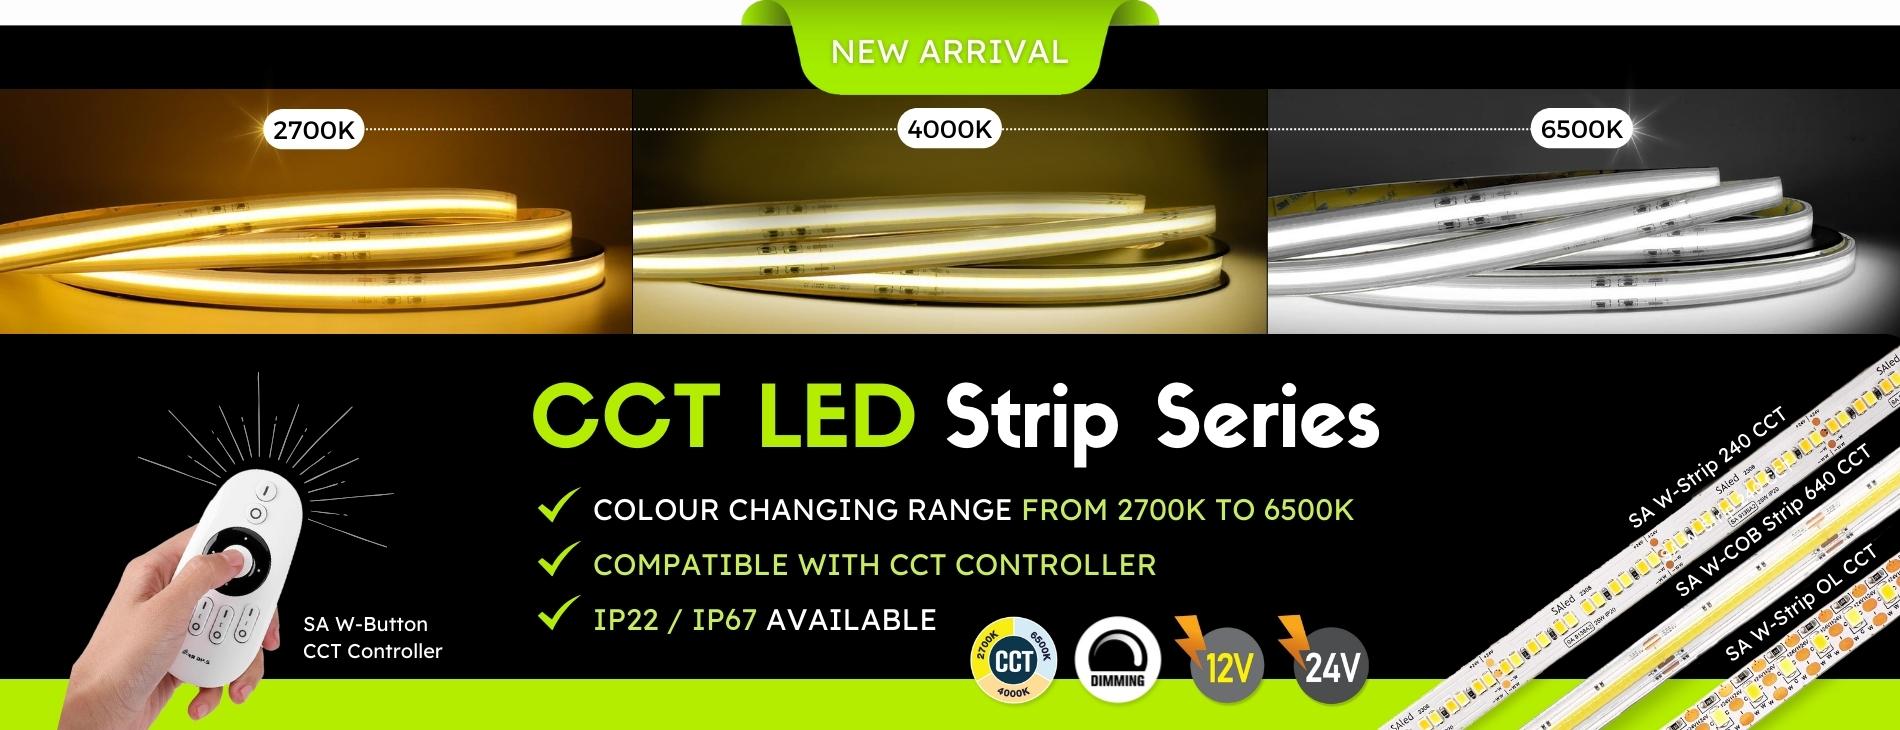 [NEW ARRIVAL] CCT LED STRIP SERIES